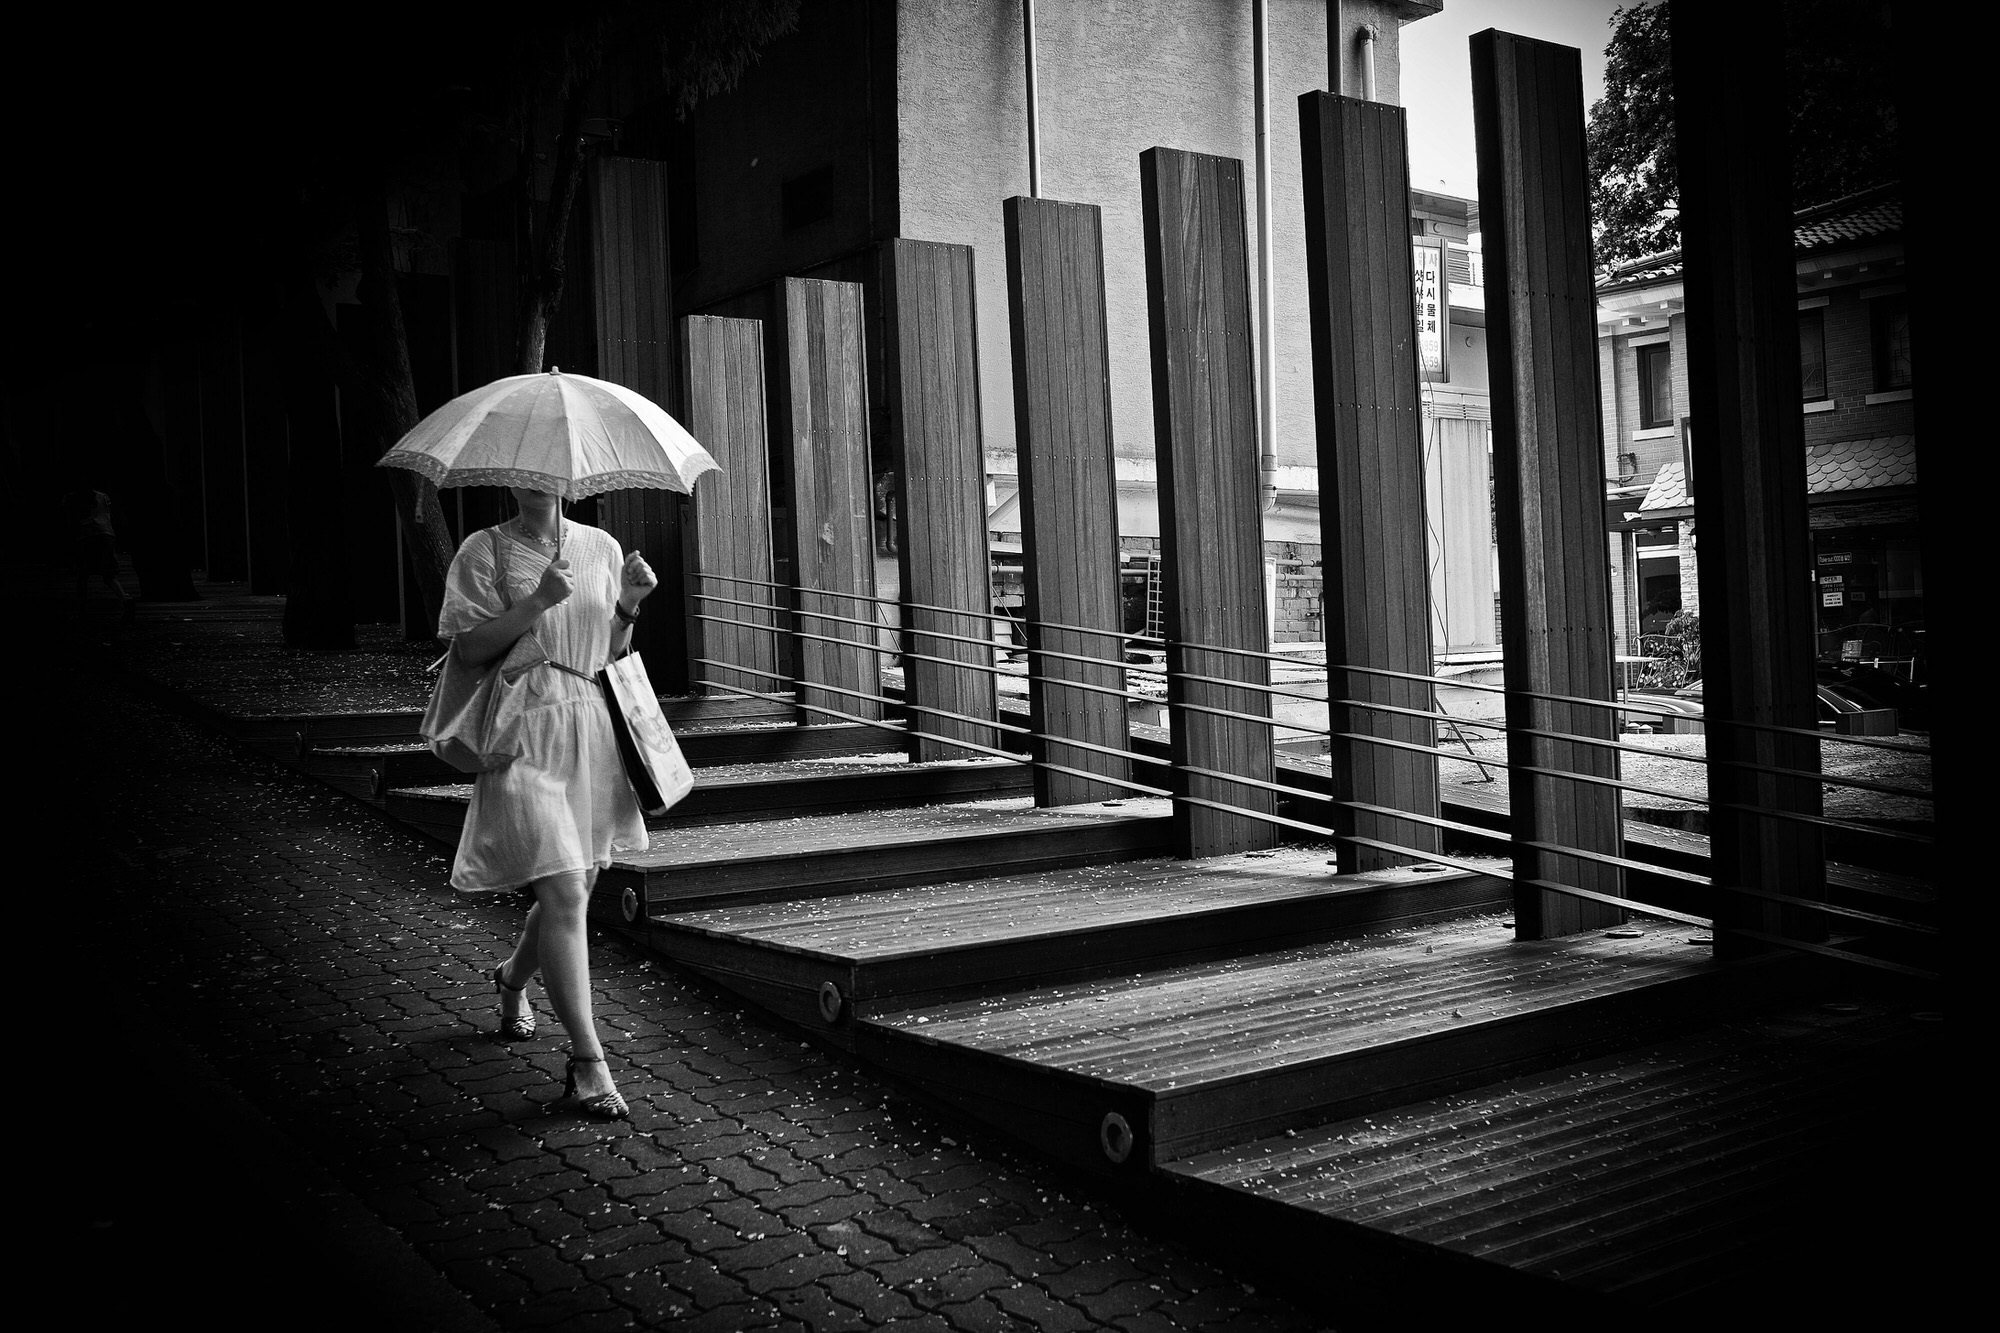 How to Master Black and White Street Photography